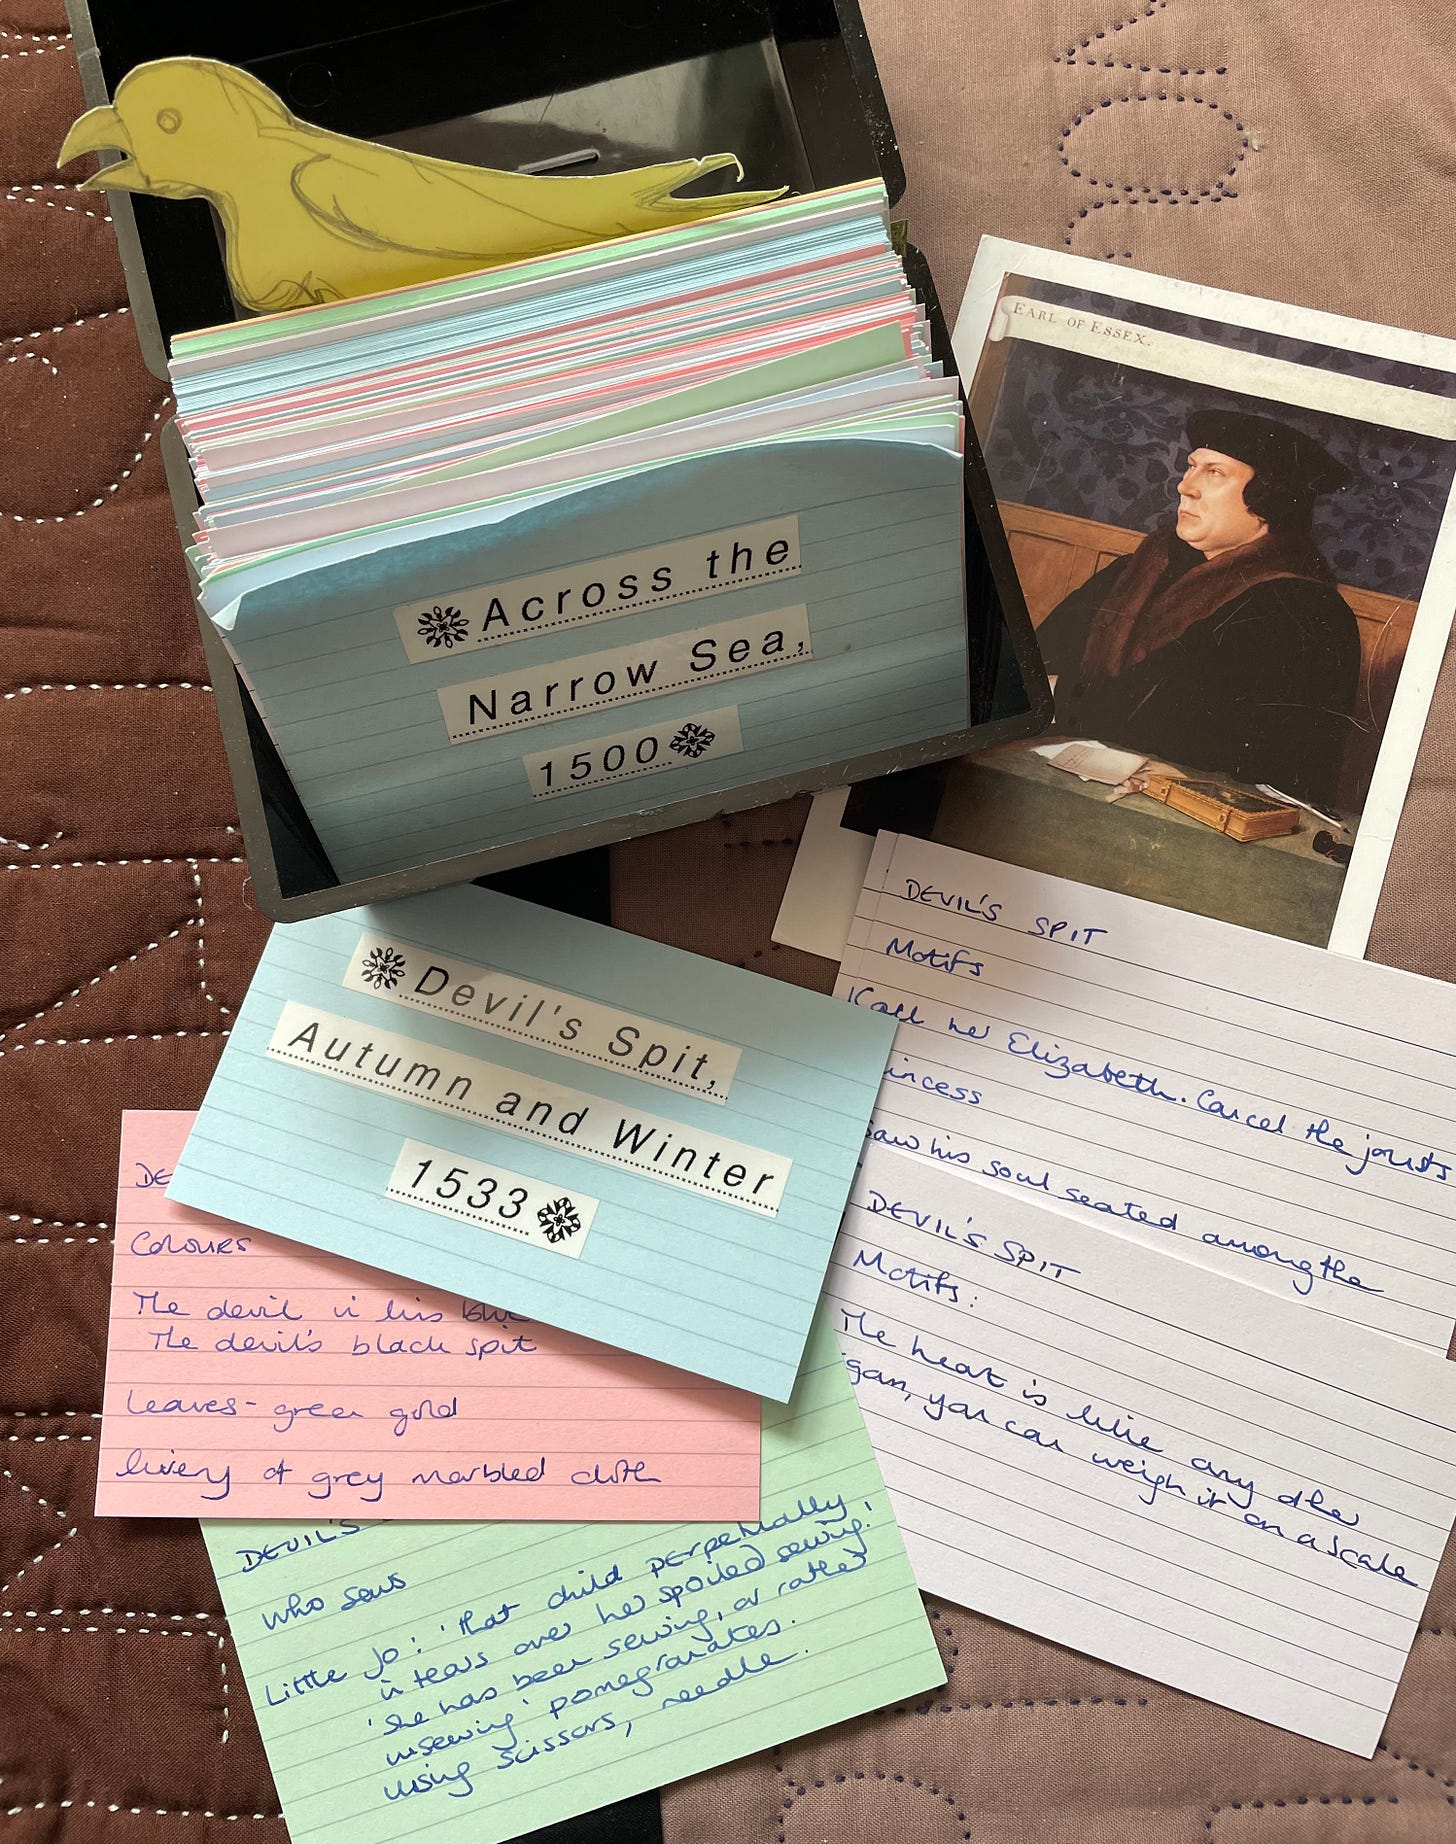 A box of index cards, open at a card that reads “Across the Narrow Sea, 1500”; a yellow bird cut out of card; a postcard of Thomas Cromwell. Some index cards are scattered outside the box.